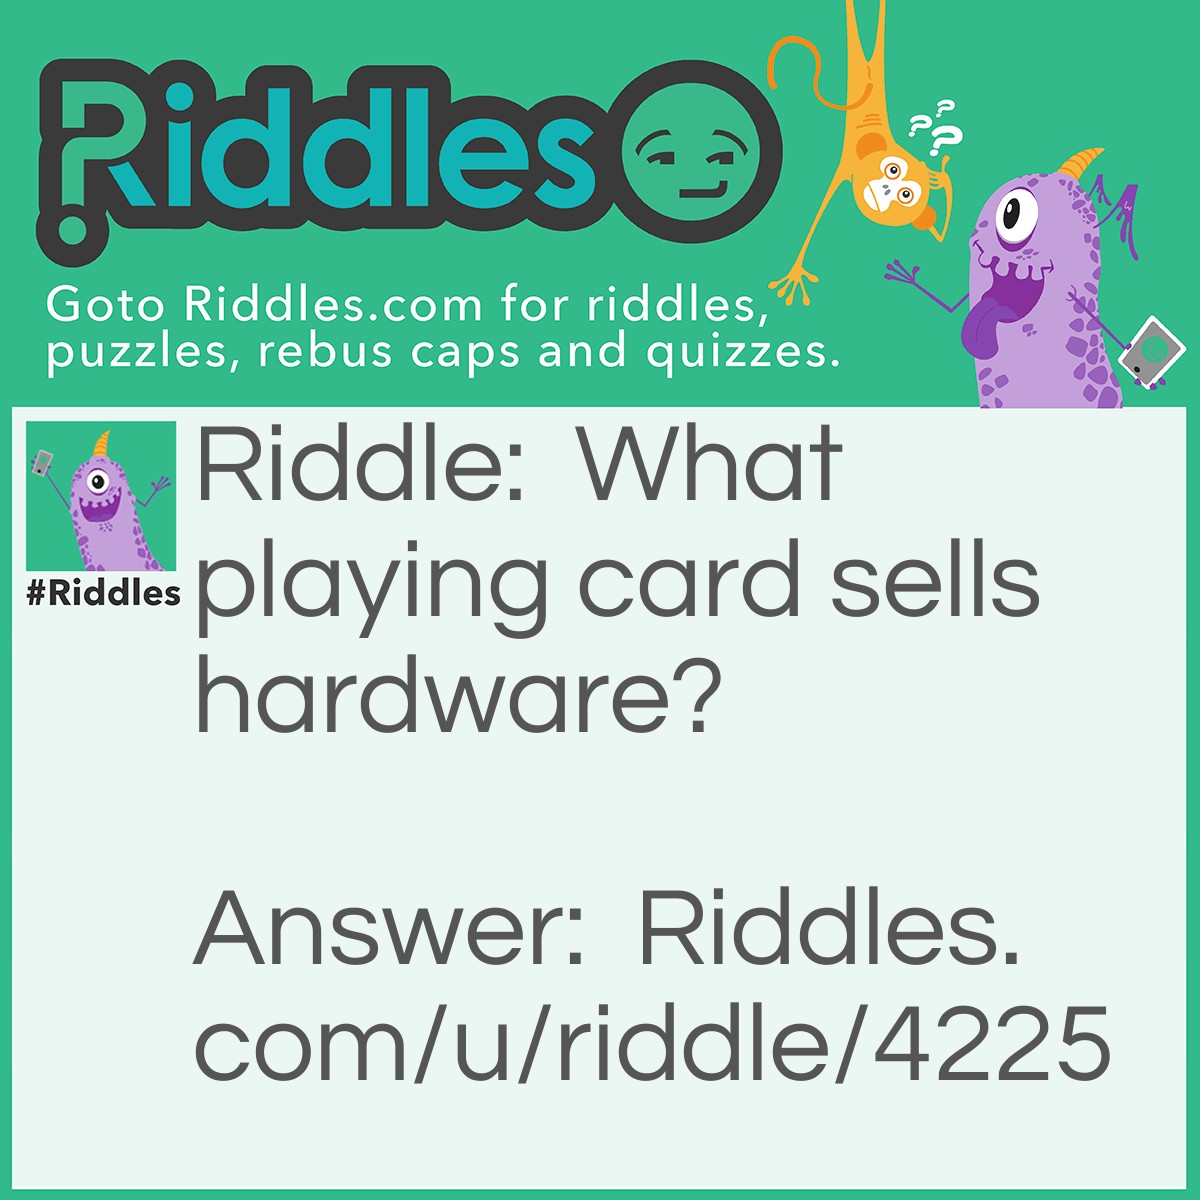 Riddle: What playing card sells hardware? Answer: Ace!